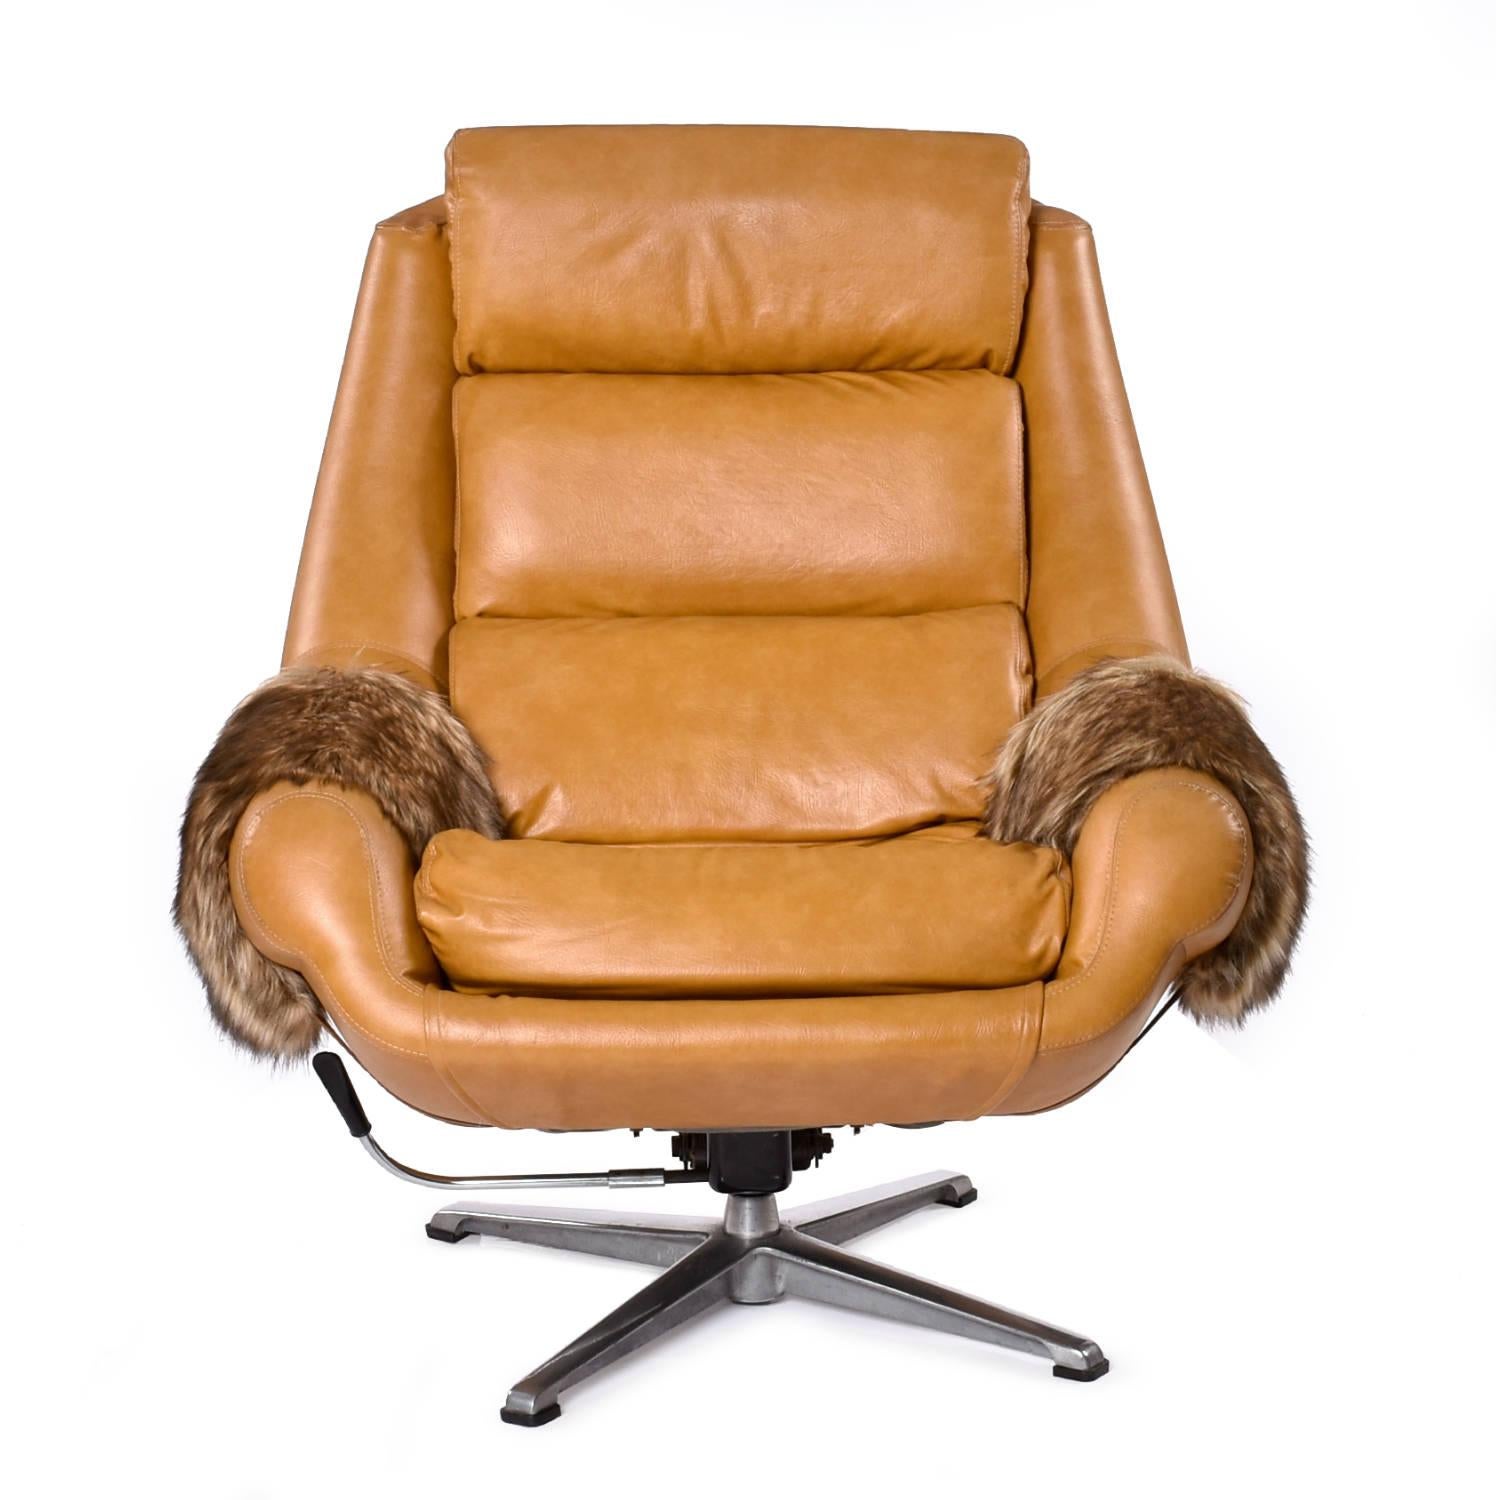 Swanky vintage 1970s pod chair recliner updated with new faux fur arms.   One of the arms had a rip, so we sealed the tear and wrapped the arms with faux fur to cover the blemish and make a bold statement.  This time capsule quality chair features